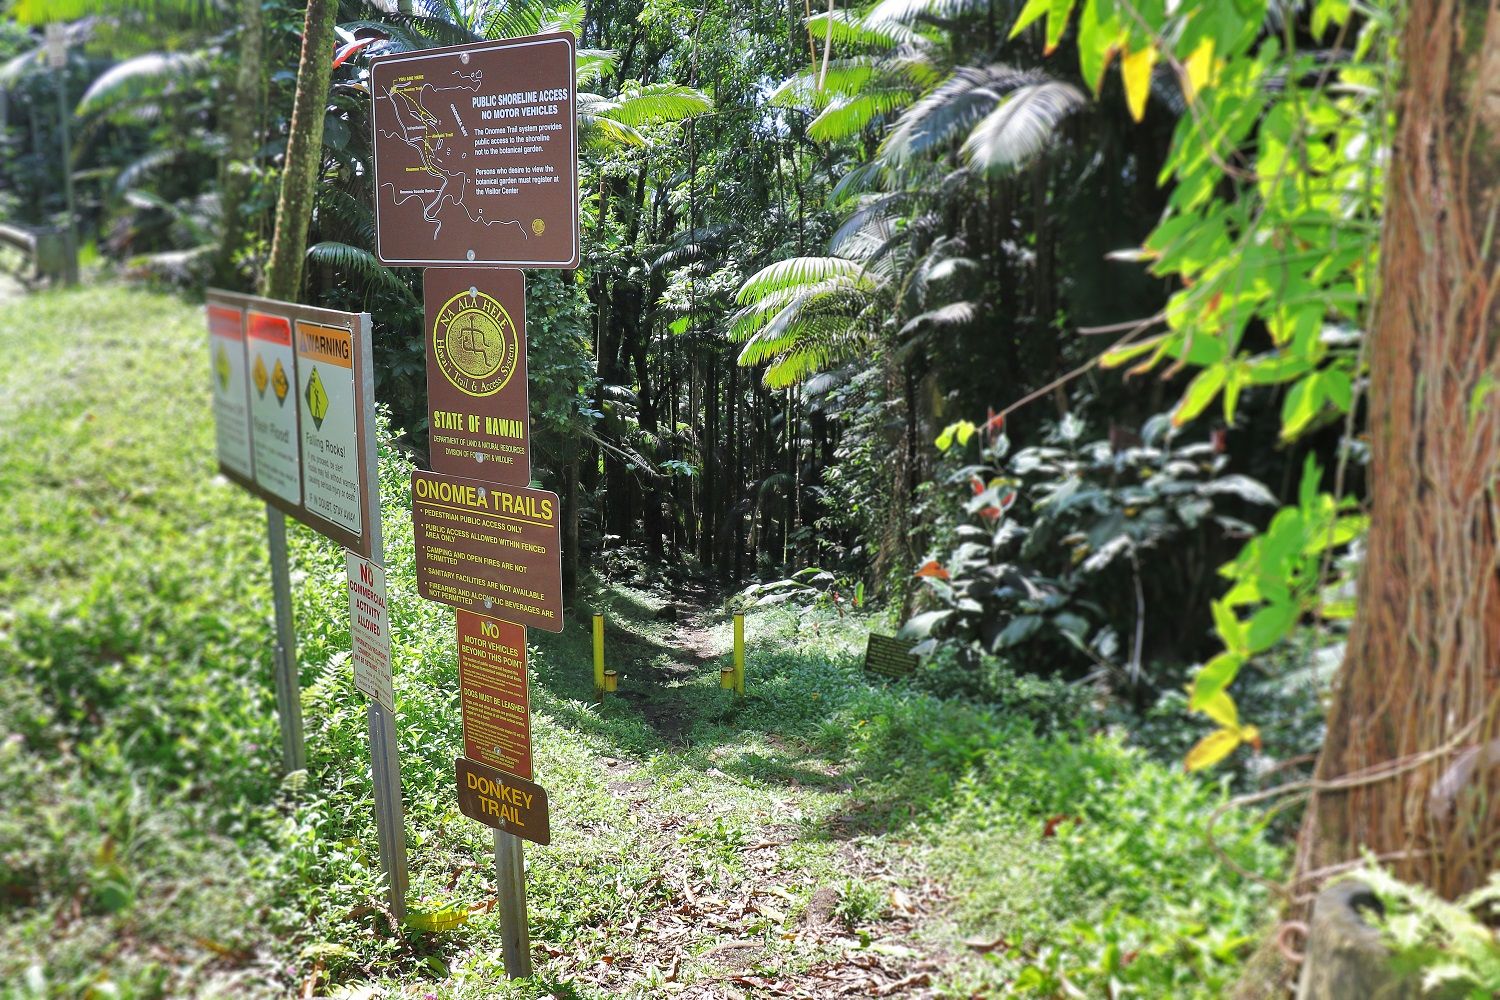 The trail head to the Donkey Trail at Onomea Bay is near the Hawaiʻi Tropical Botanical Garden's Vistor's Center